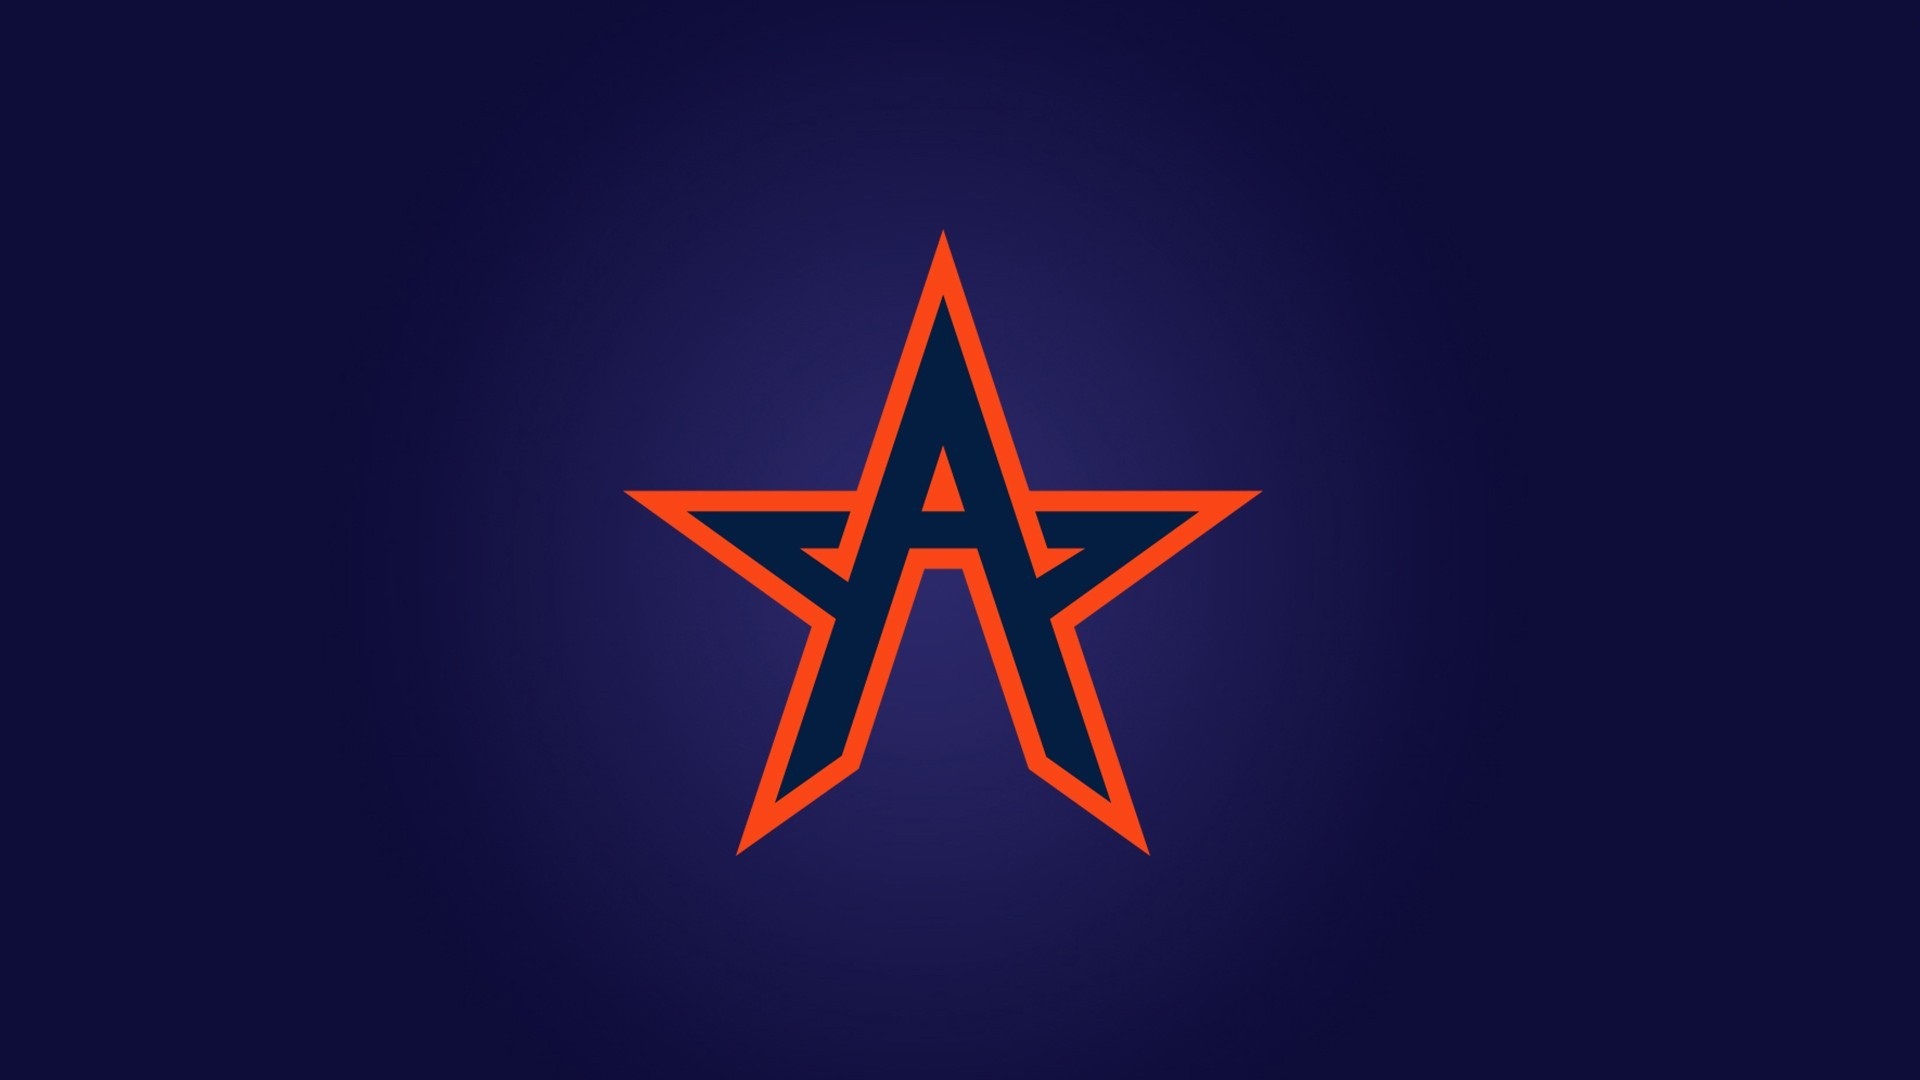 Wallpaper Desktop Houston Astros Logo HD With high-resolution 1920X1080 pixel. You can use this wallpaper for Mac Desktop Wallpaper, Laptop Screensavers, Android Wallpapers, Tablet or iPhone Home Screen and another mobile phone device